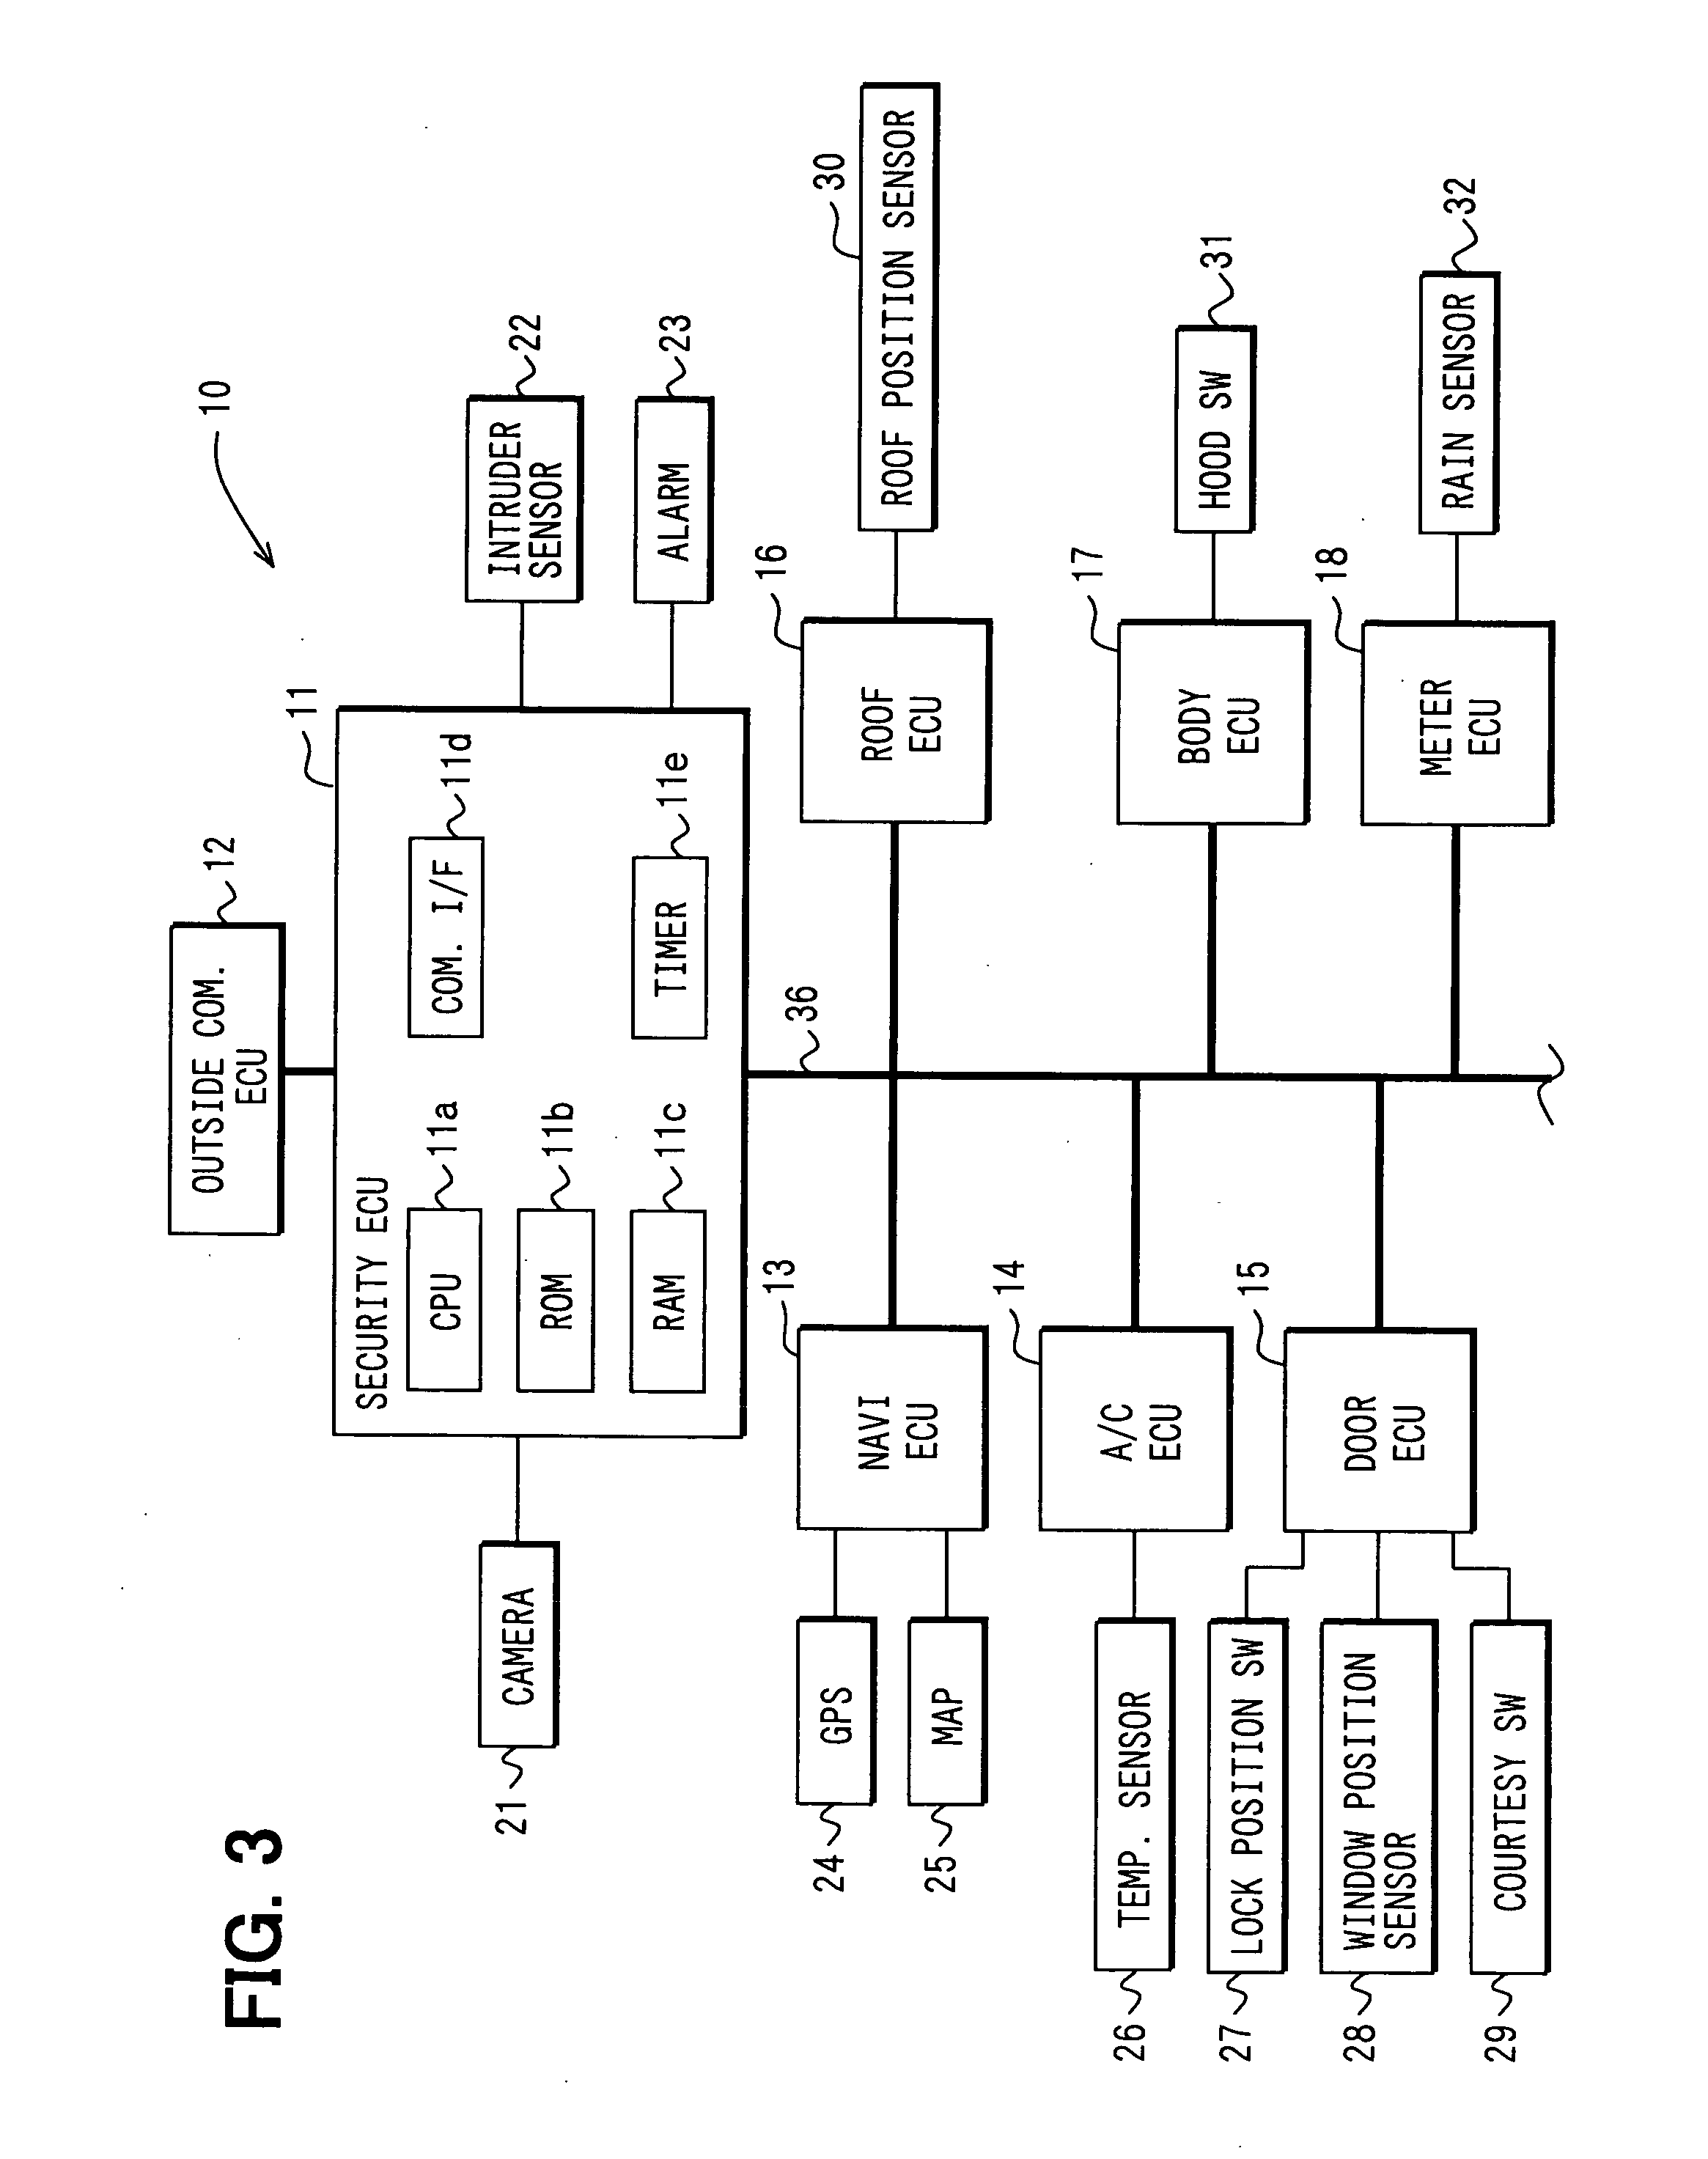 Remote monitoring system and method